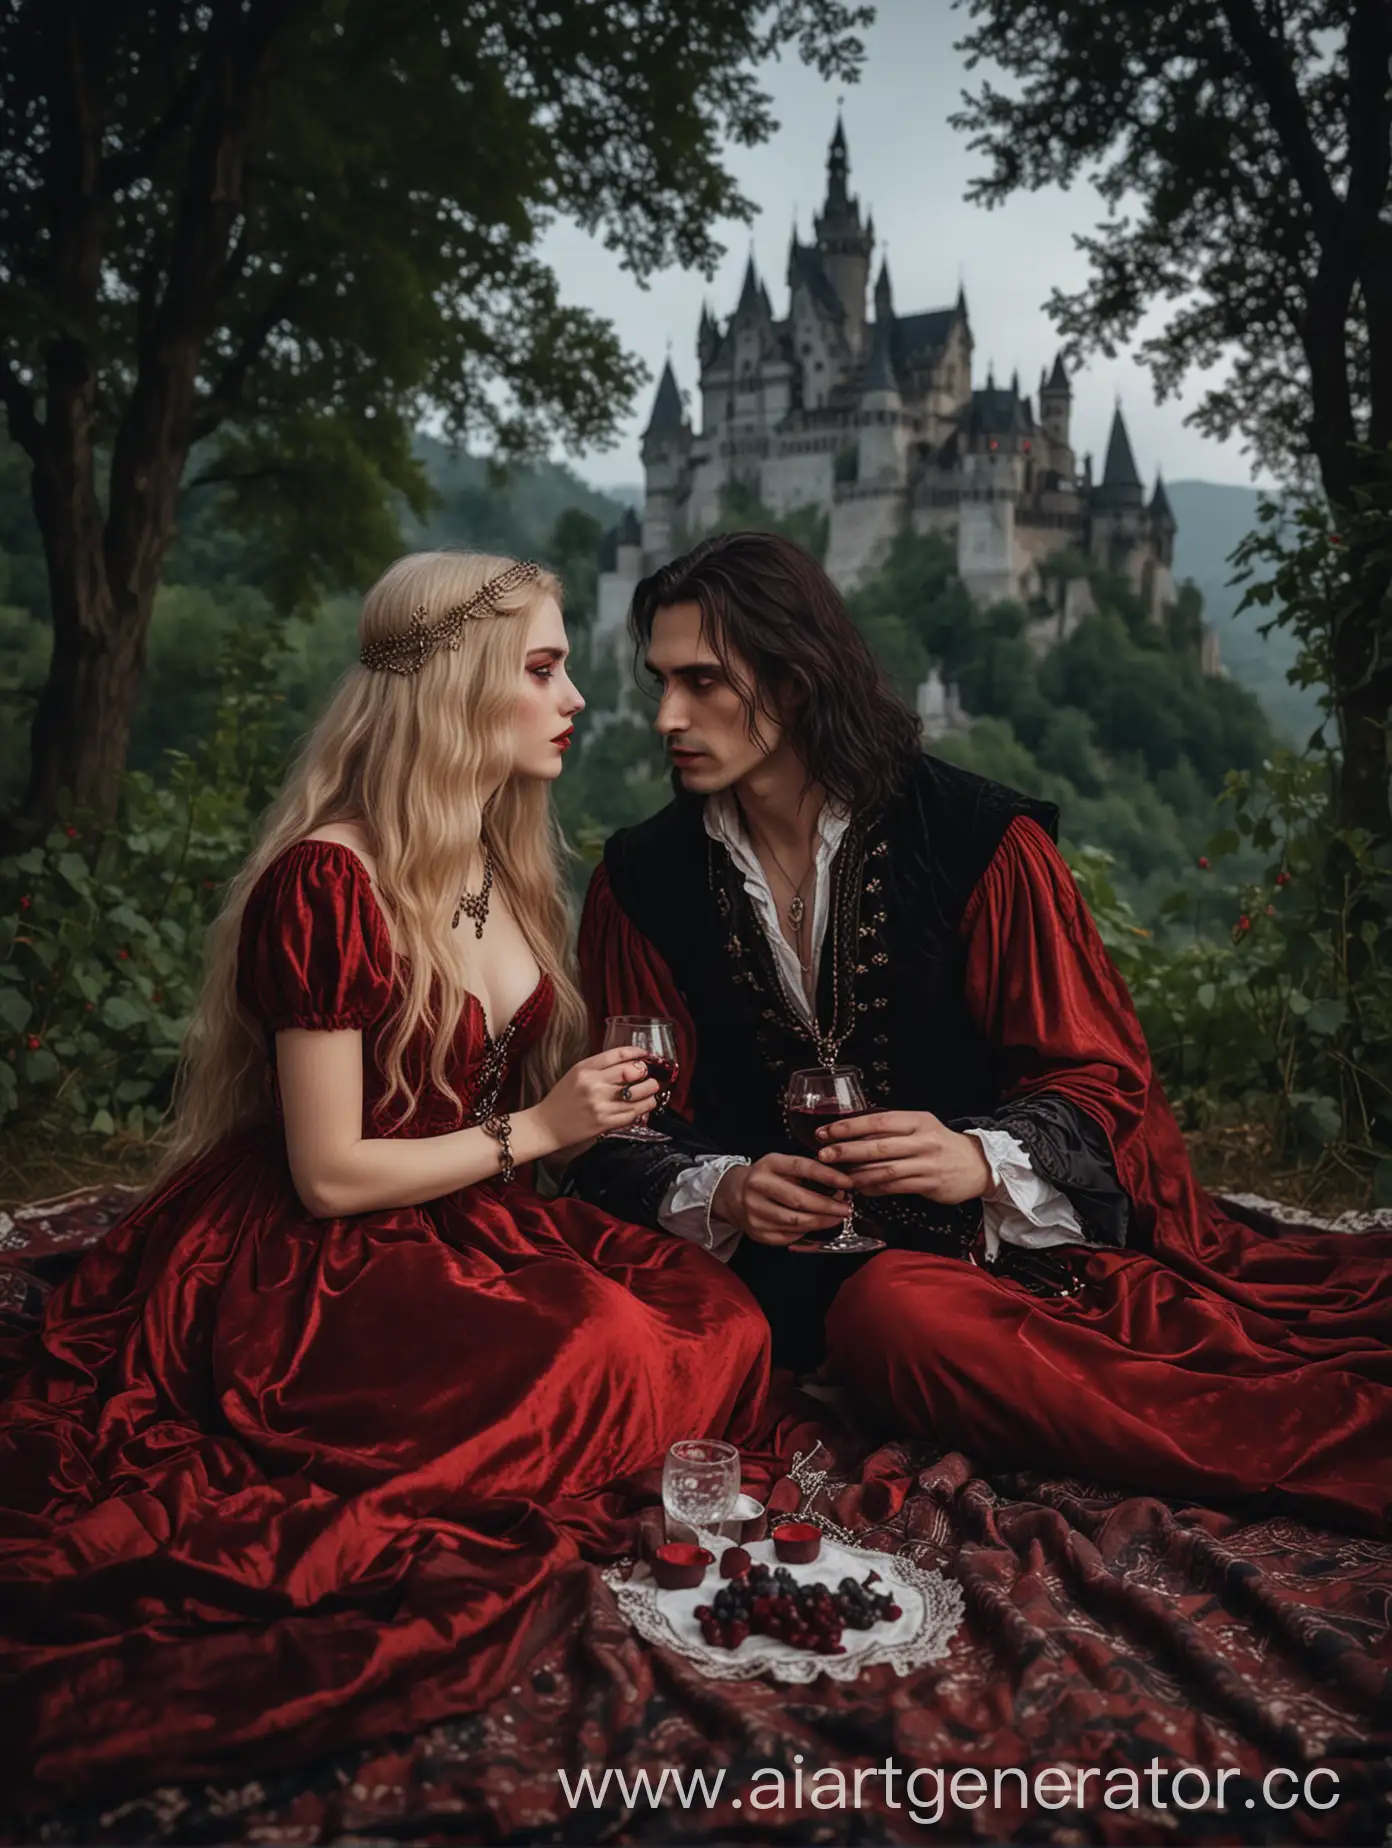 picnic in the forest, two wealthy vampires with red eyes are sitting face to face on a blanket (a girl with long light hair with decorations in a red velvet dress and a man with black long hair with a pendant on his neck) drinking red wine from beautiful glasses, around greenery in dark tones, in the background in the distance Dracula's castle, dusk and light fog